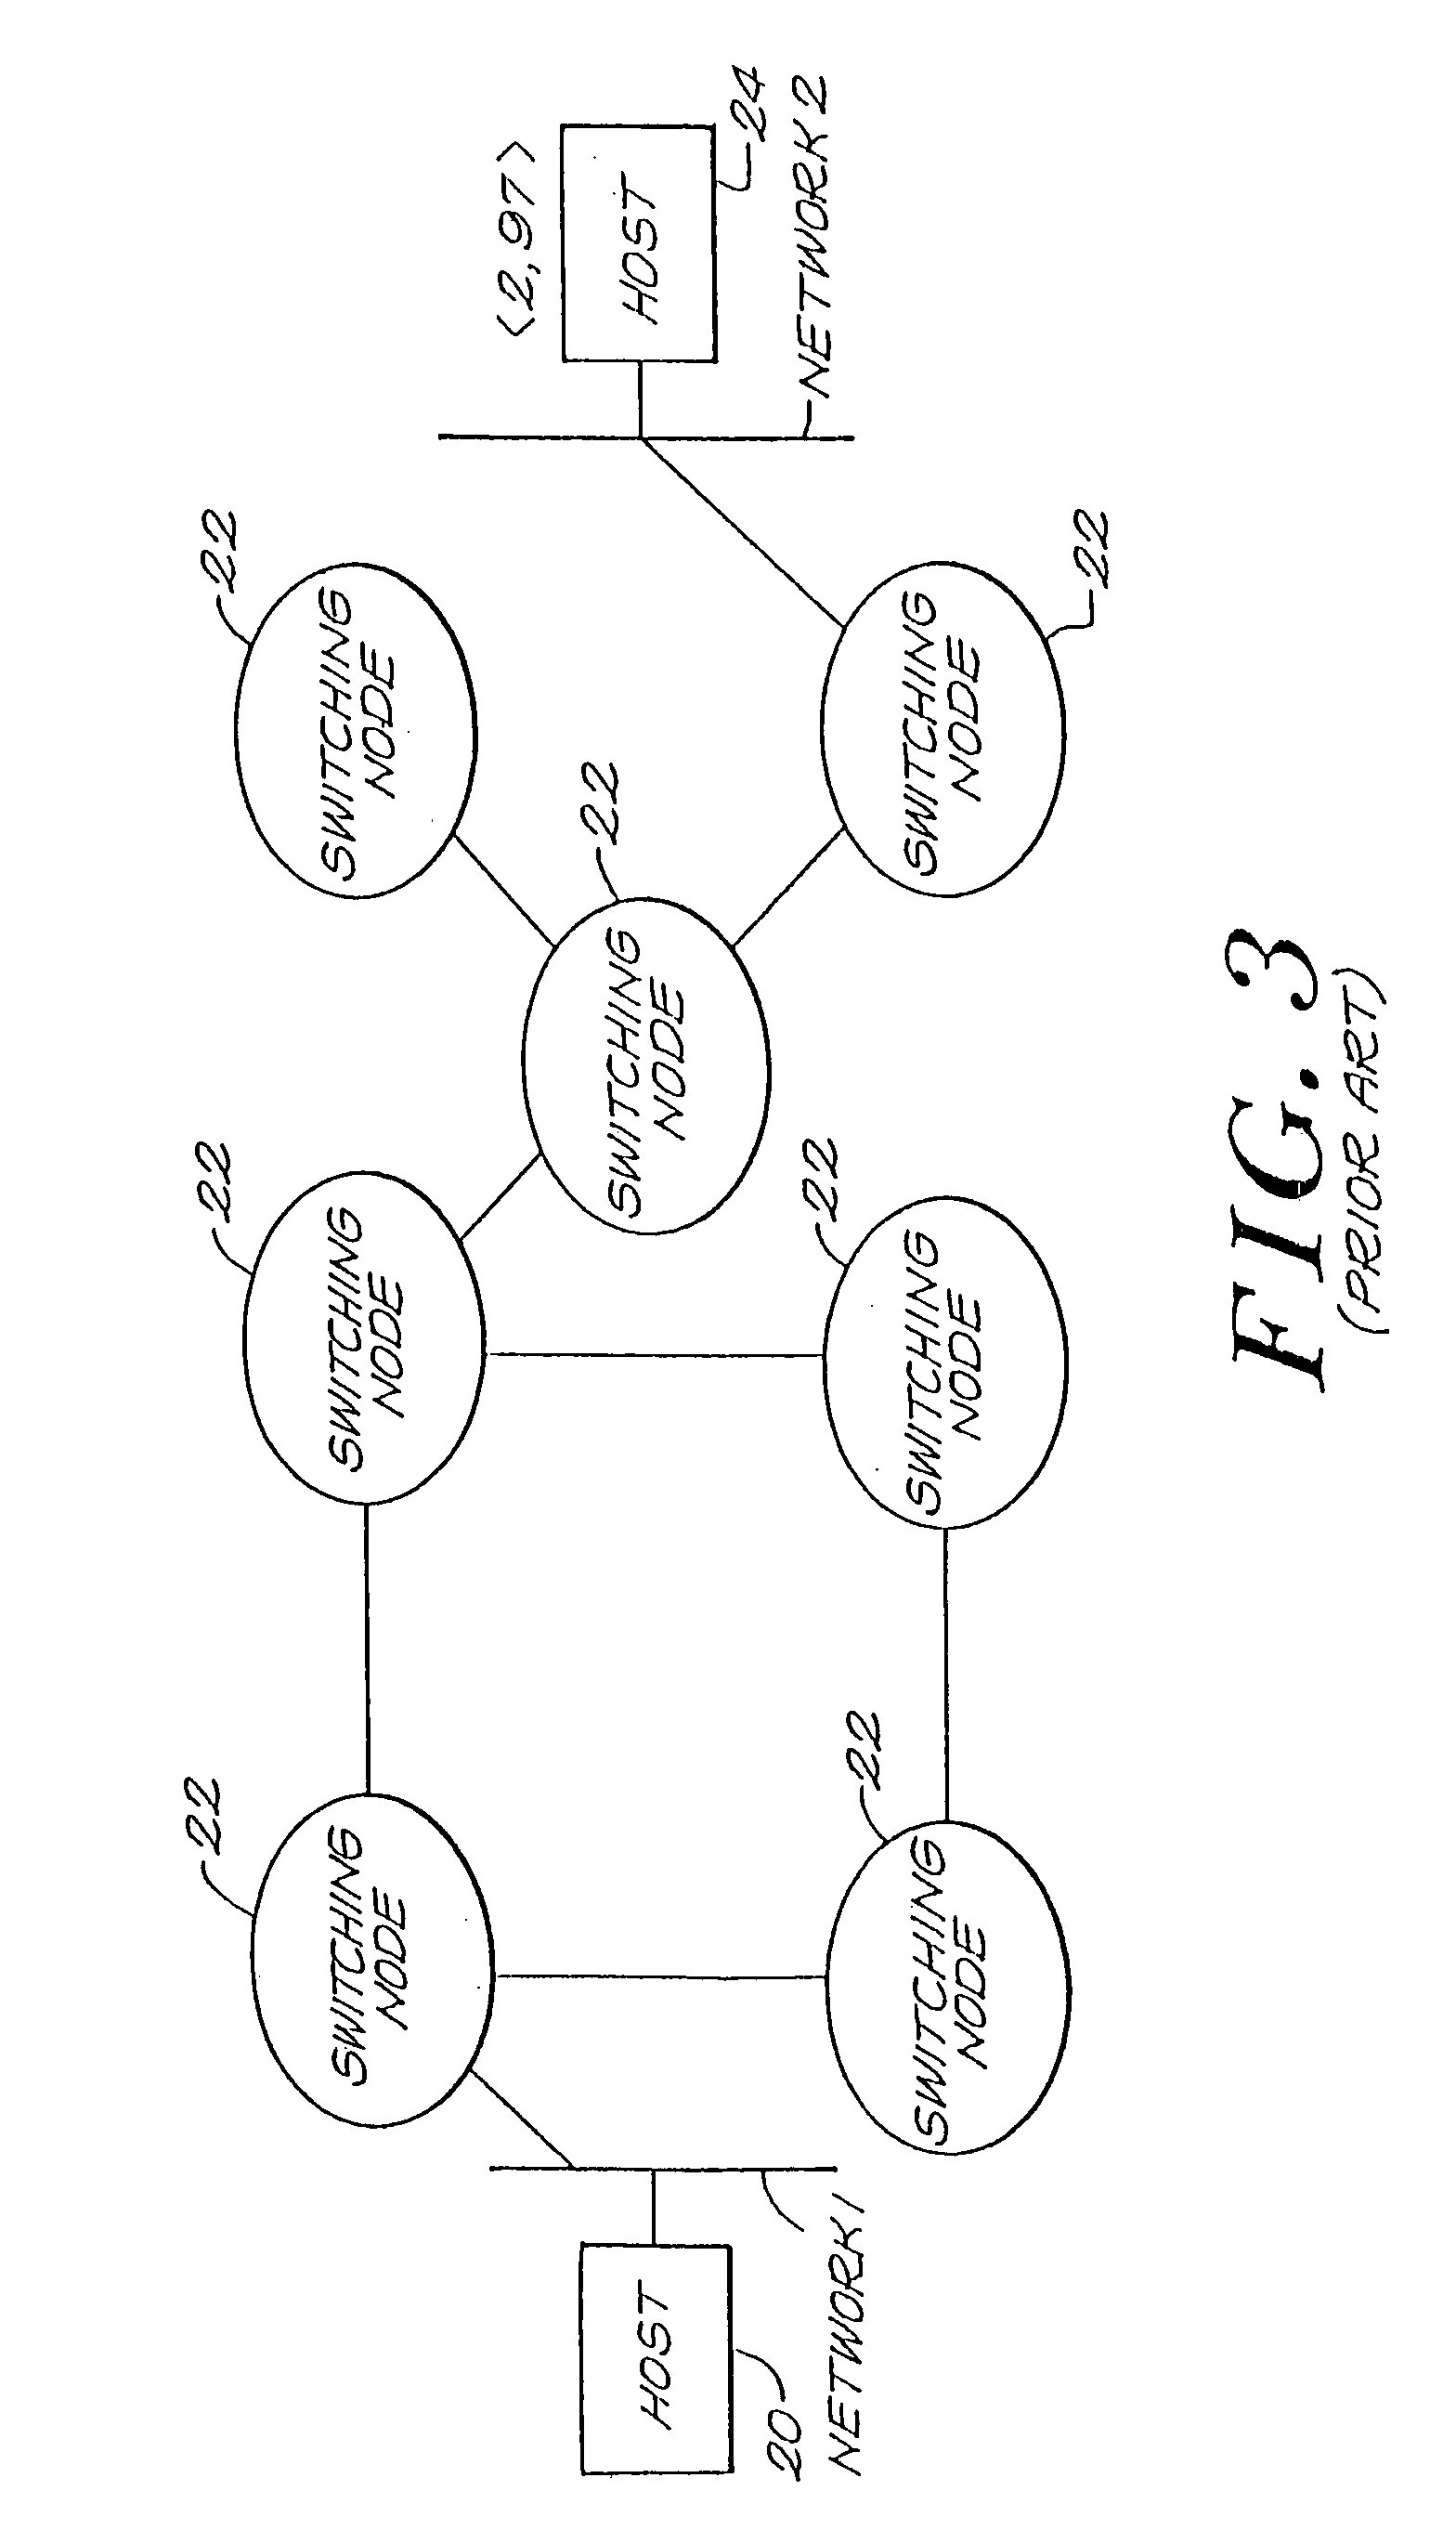 Network packet forwarding lookup with a reduced number of memory accesses